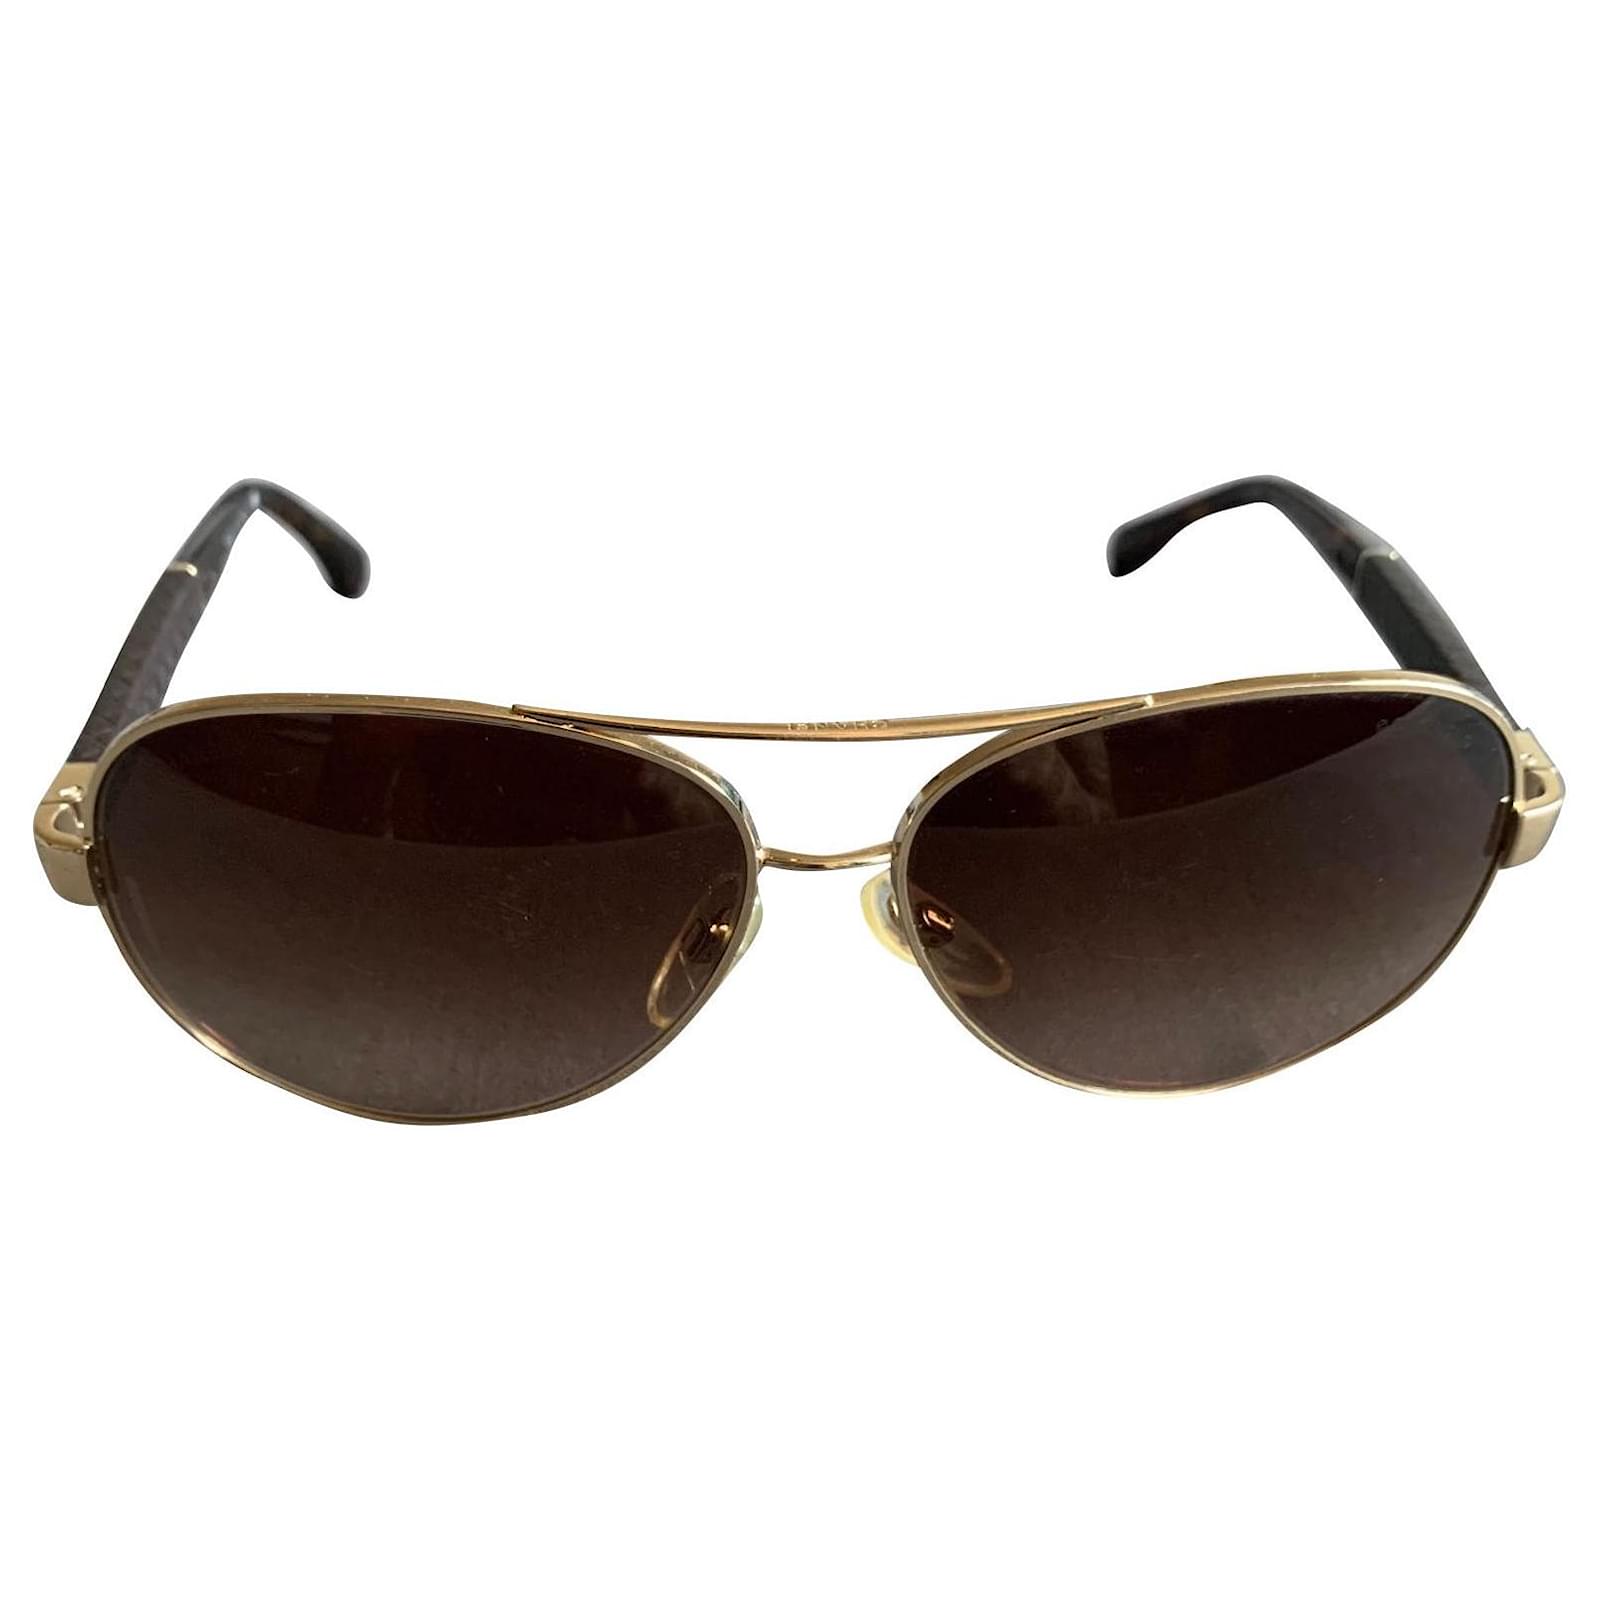 Chanel Gold Aviator Sunglasses  Best Price and Reviews  Zulily